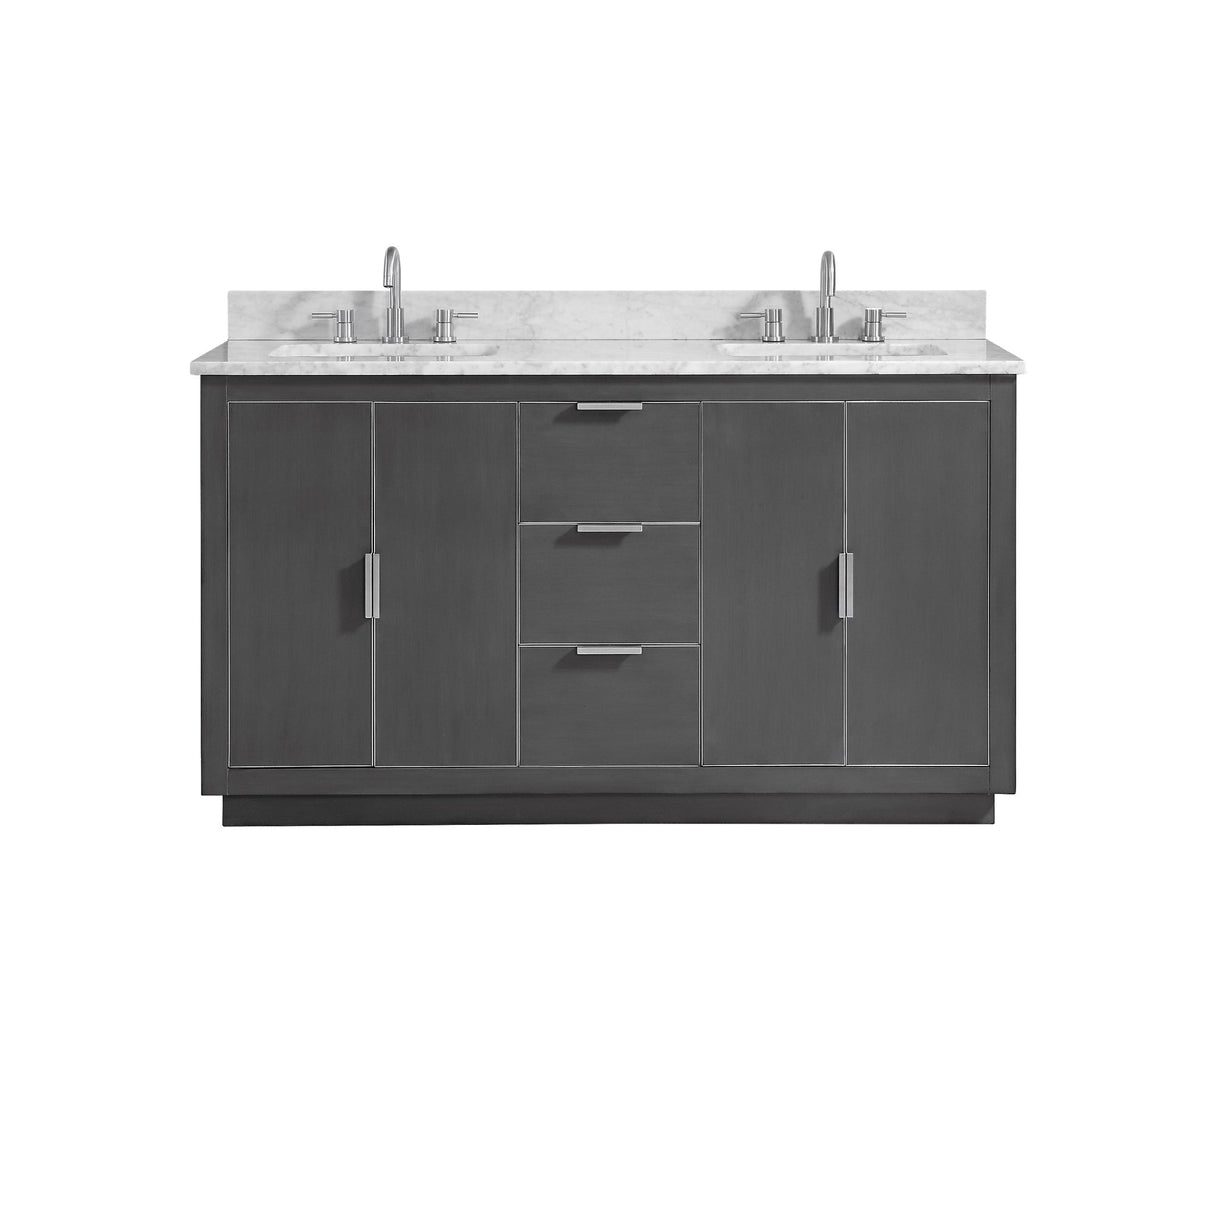 Avanity Austen 61 in. Vanity Combo in Twilight Gray with Silver Trim and Carrara White Marble Top 